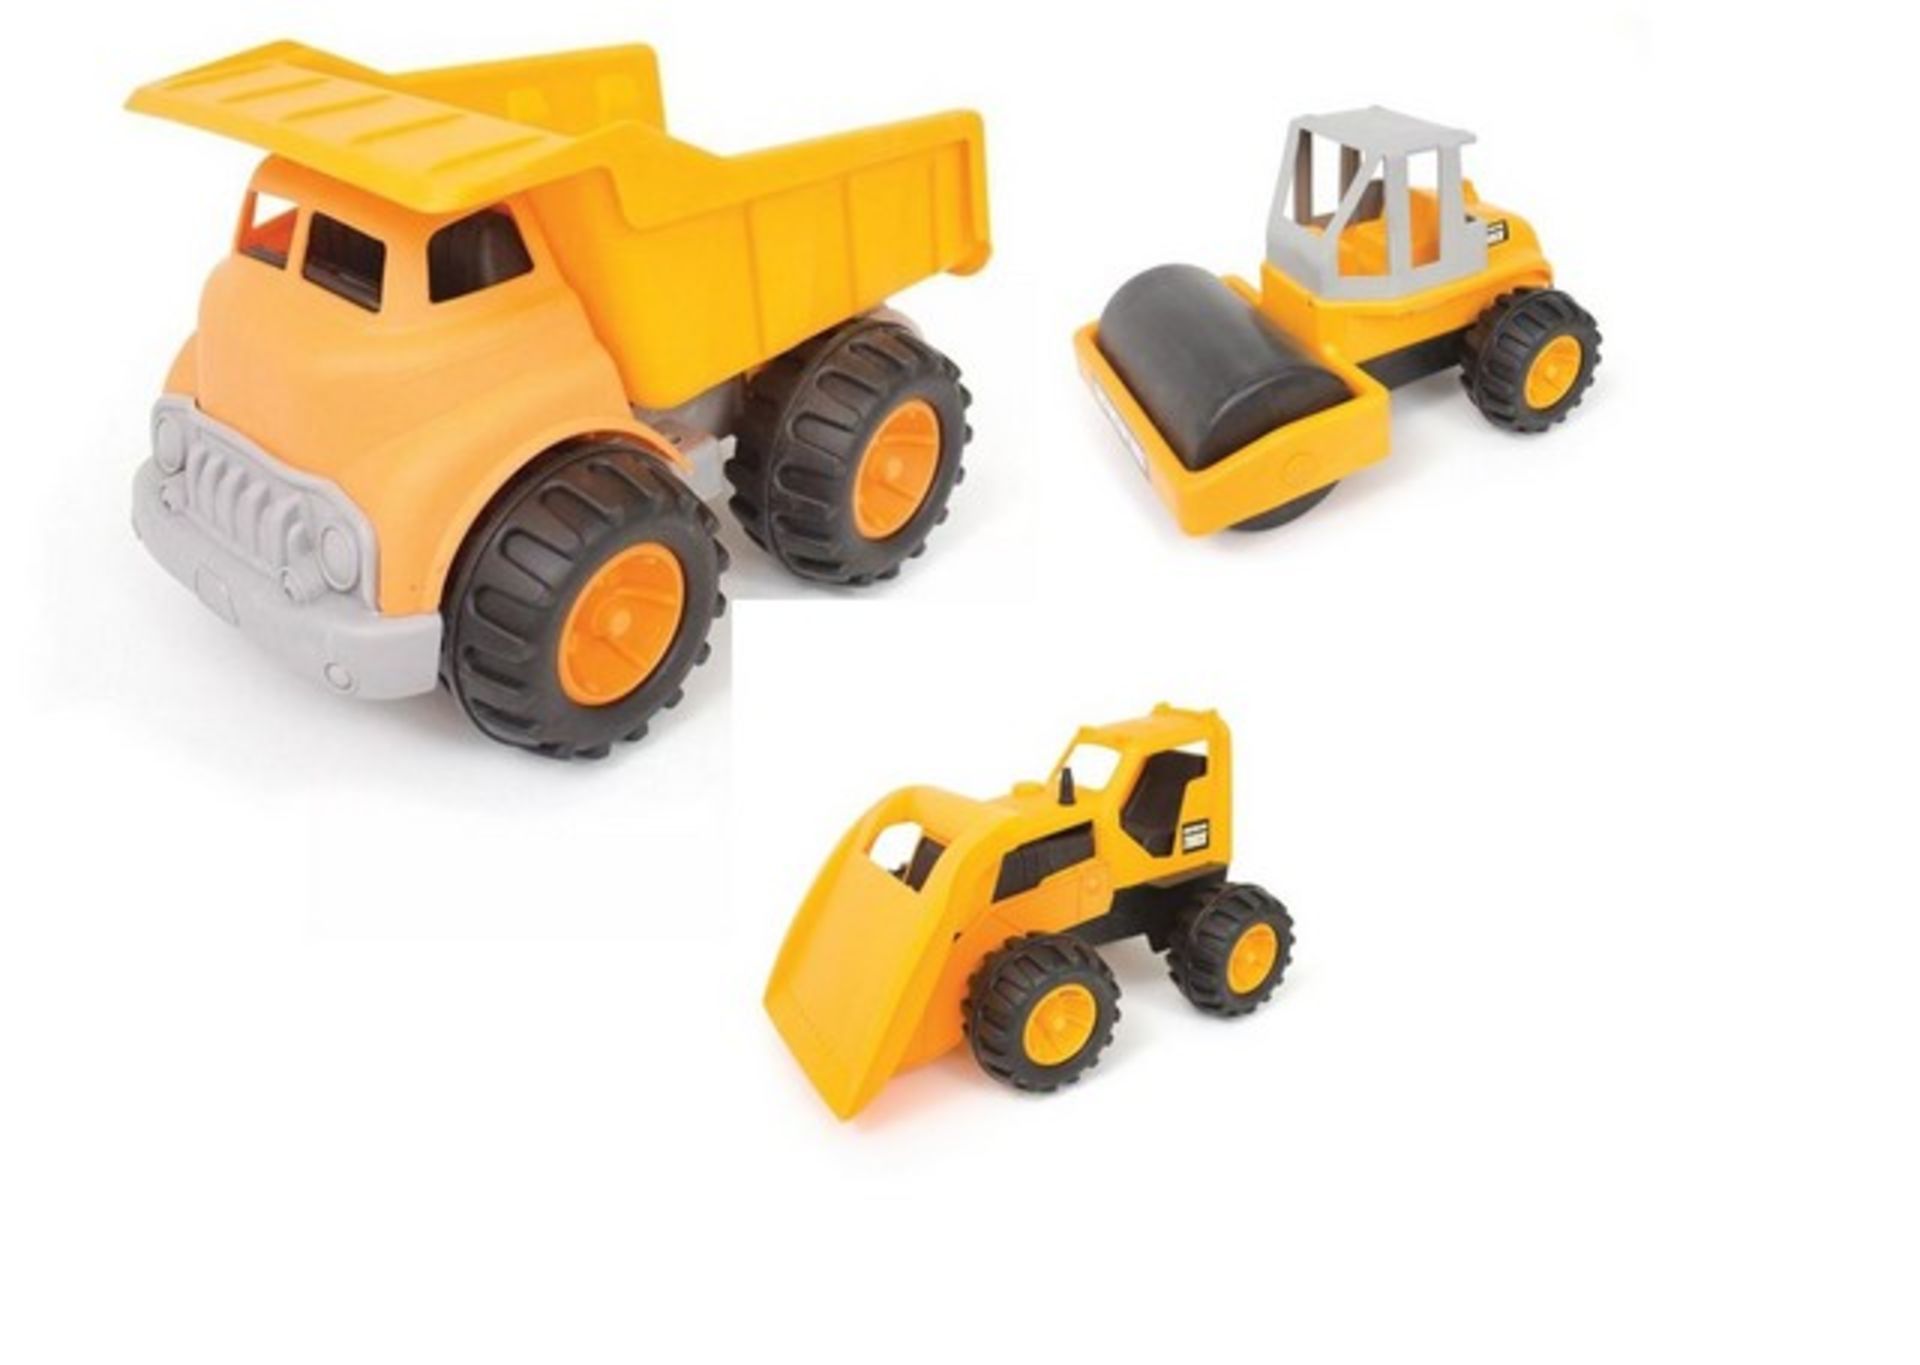 V Brand New Big Play Truck Construction Engineering Brigade Vehicle Set - Ideal For Sandpit Play ( - Image 2 of 2